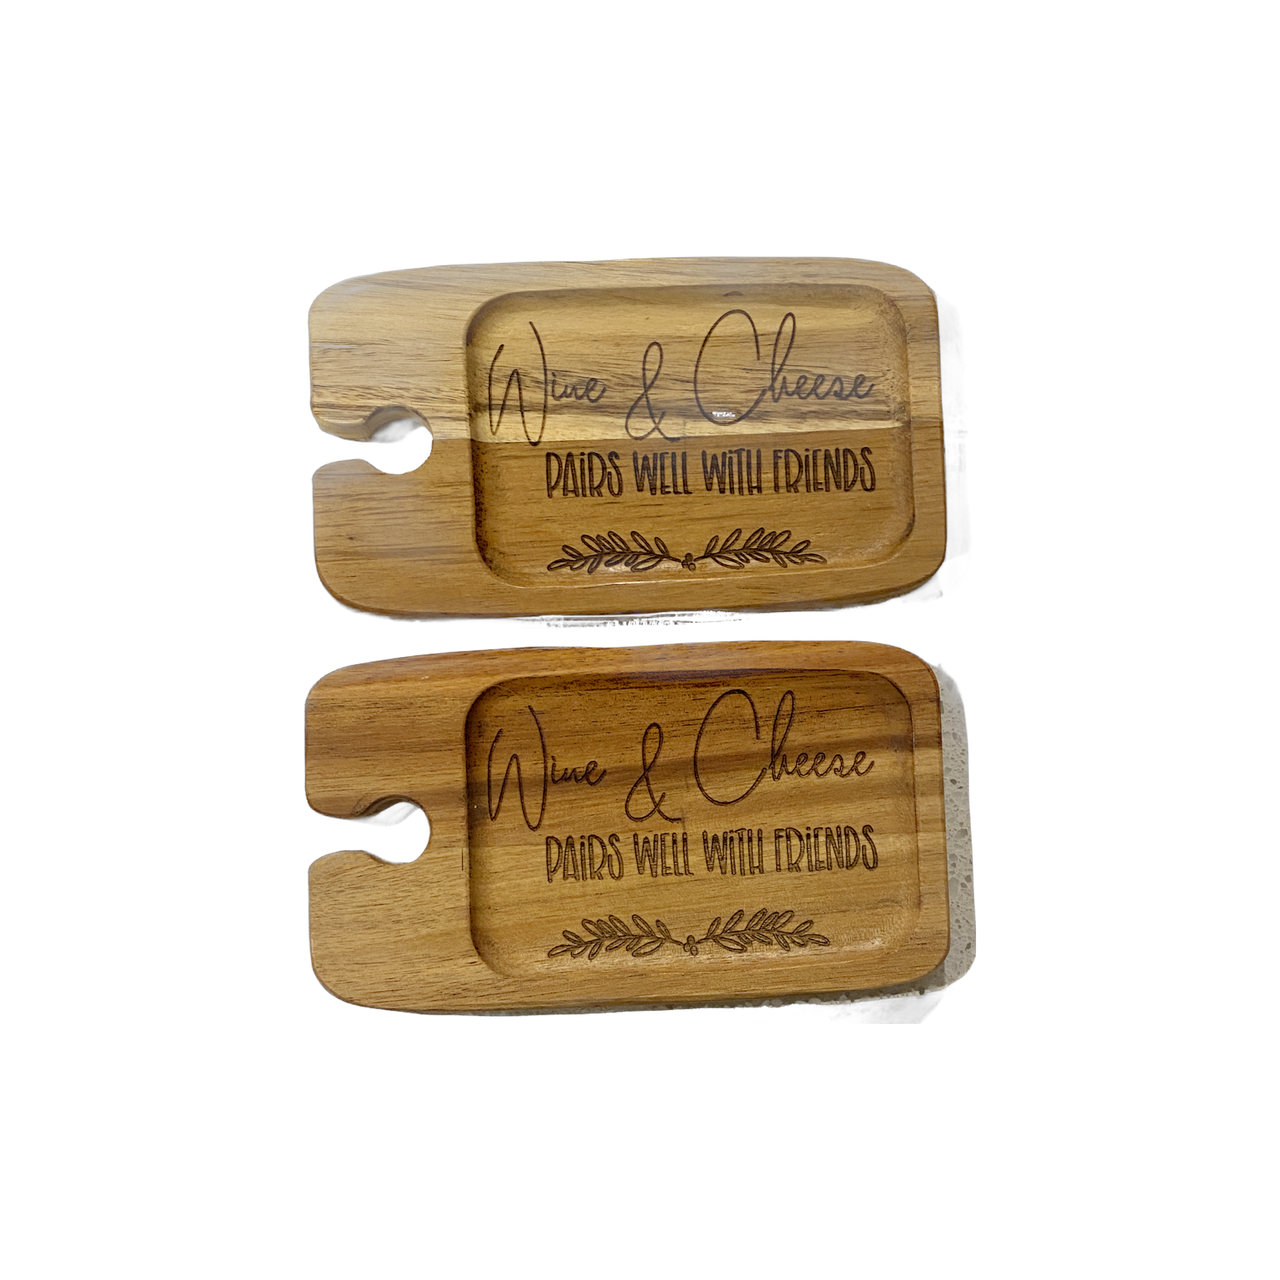 Small Wooden Cheese / Wine Board Pair- Wine & Cheese, Pairs well with Friends